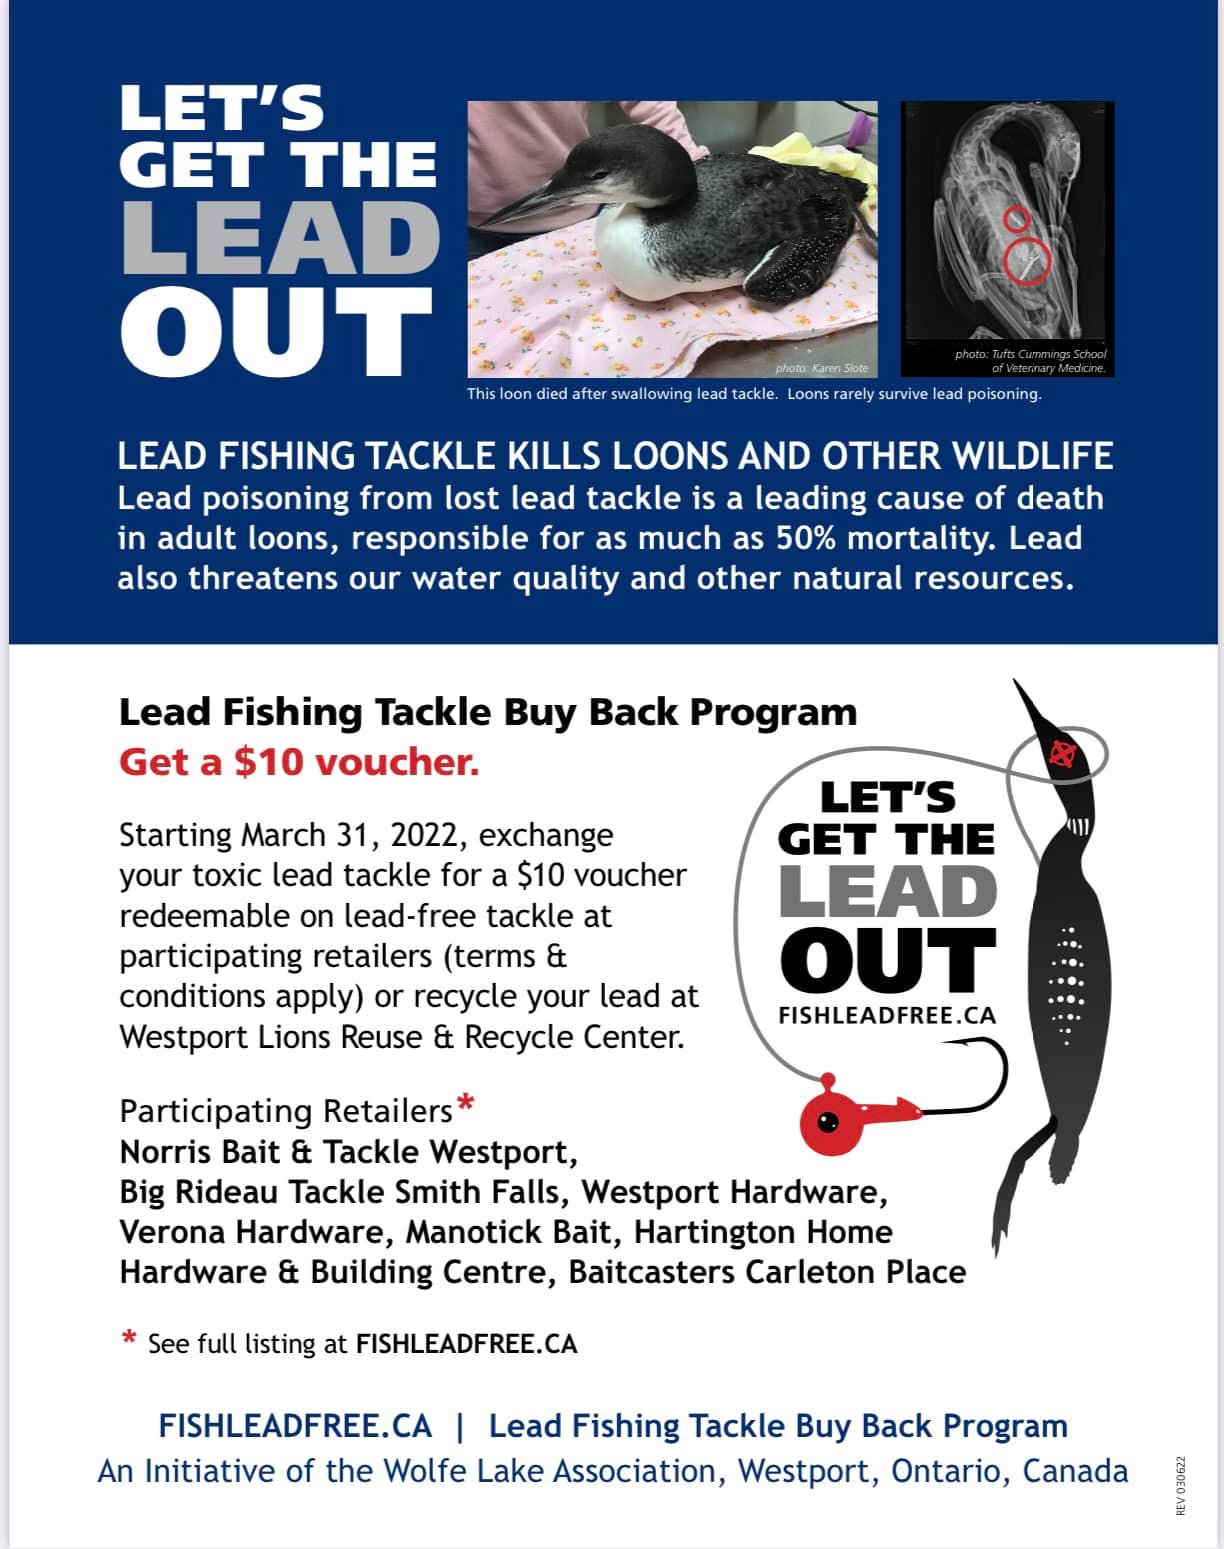 Lead tackle buyback program offered - Ontario OUT of DOORS